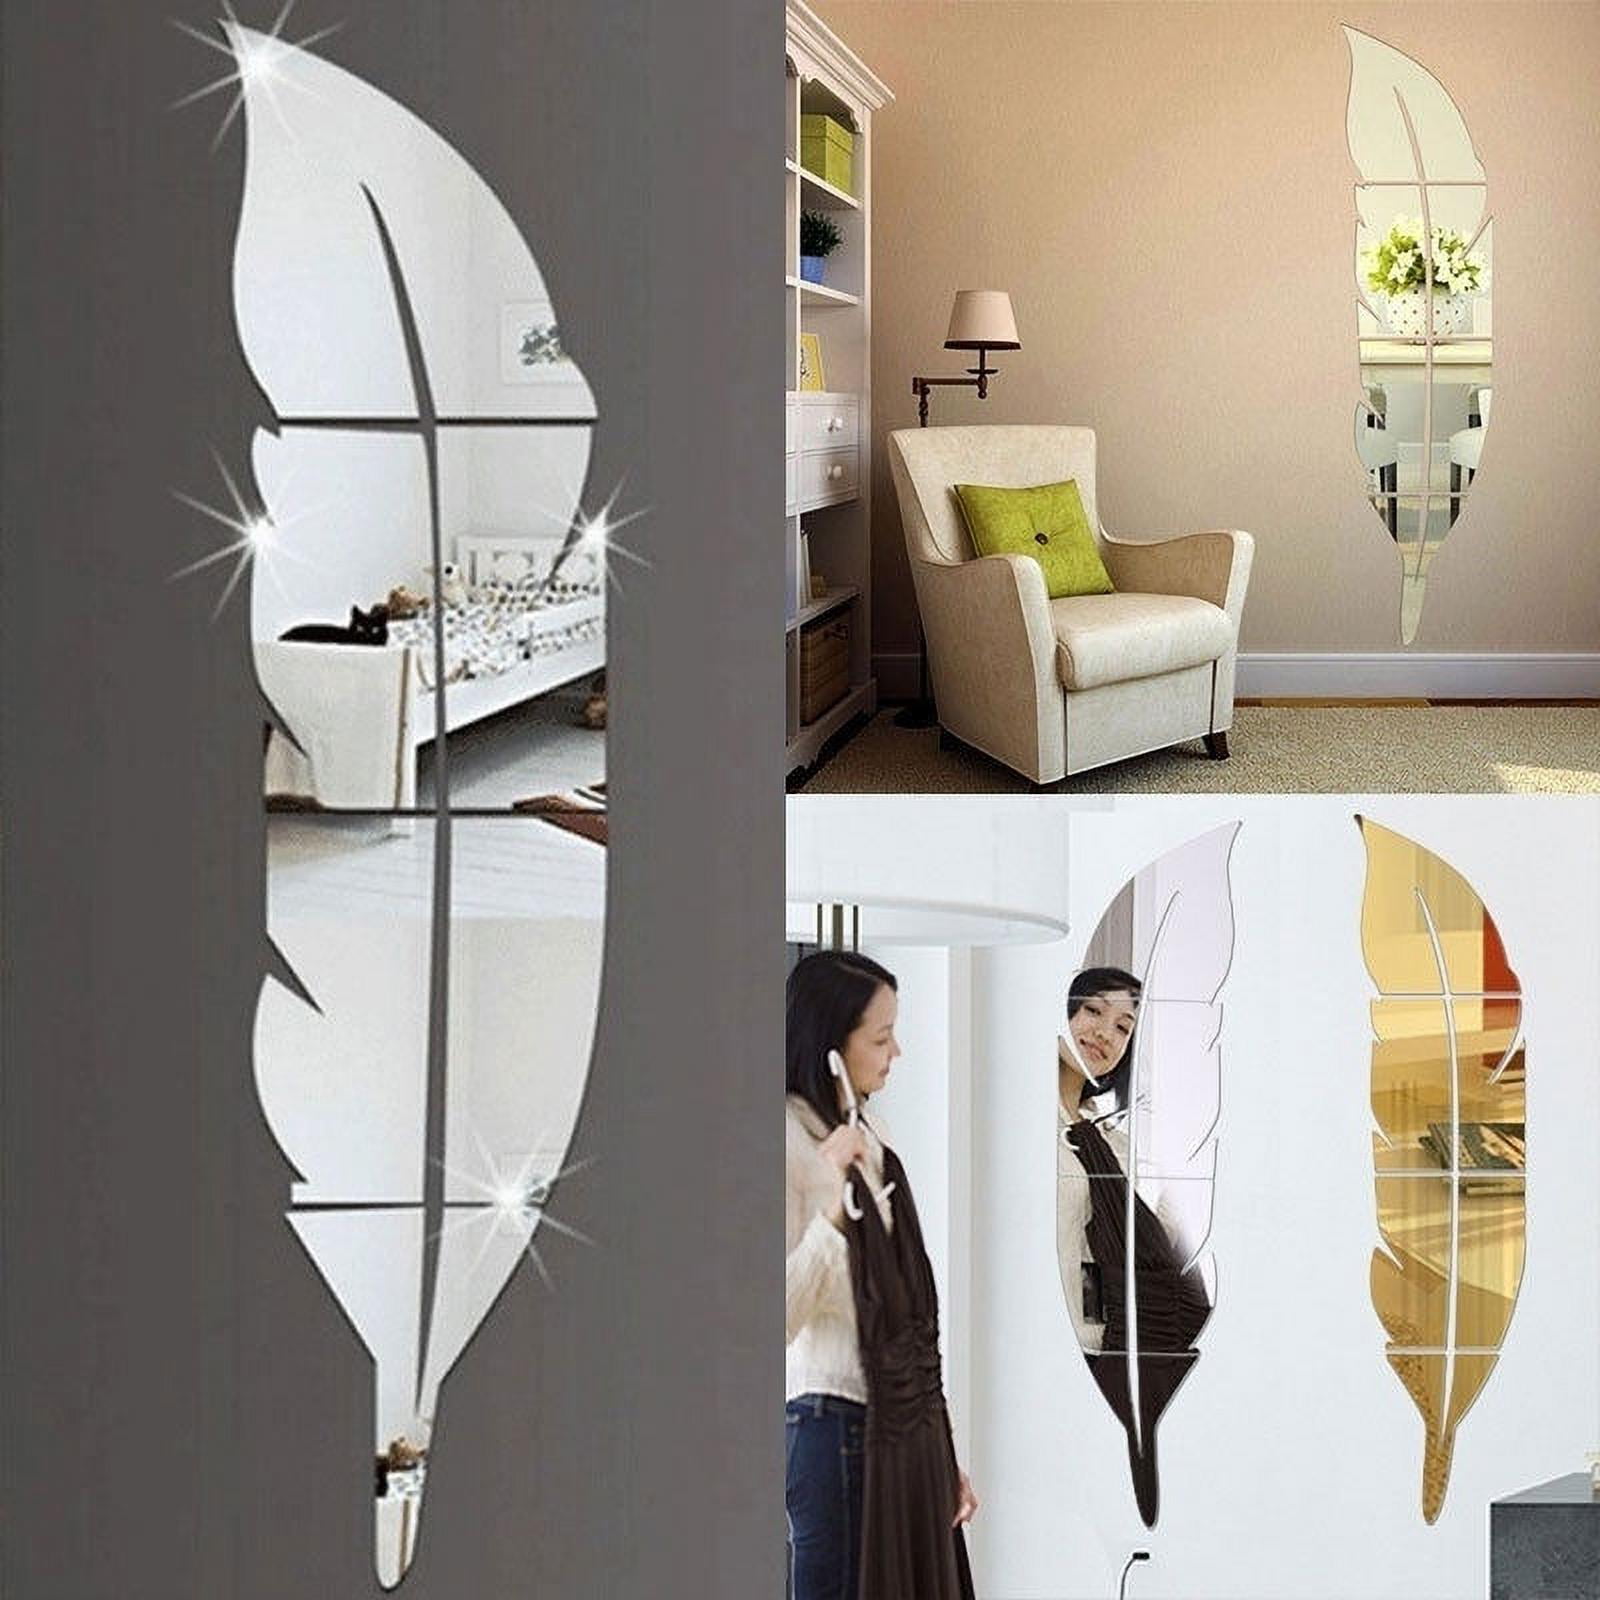 3D DIY Removable Feather Mirror Home Room Decal Vinyl Art Stickers Wall Decors 